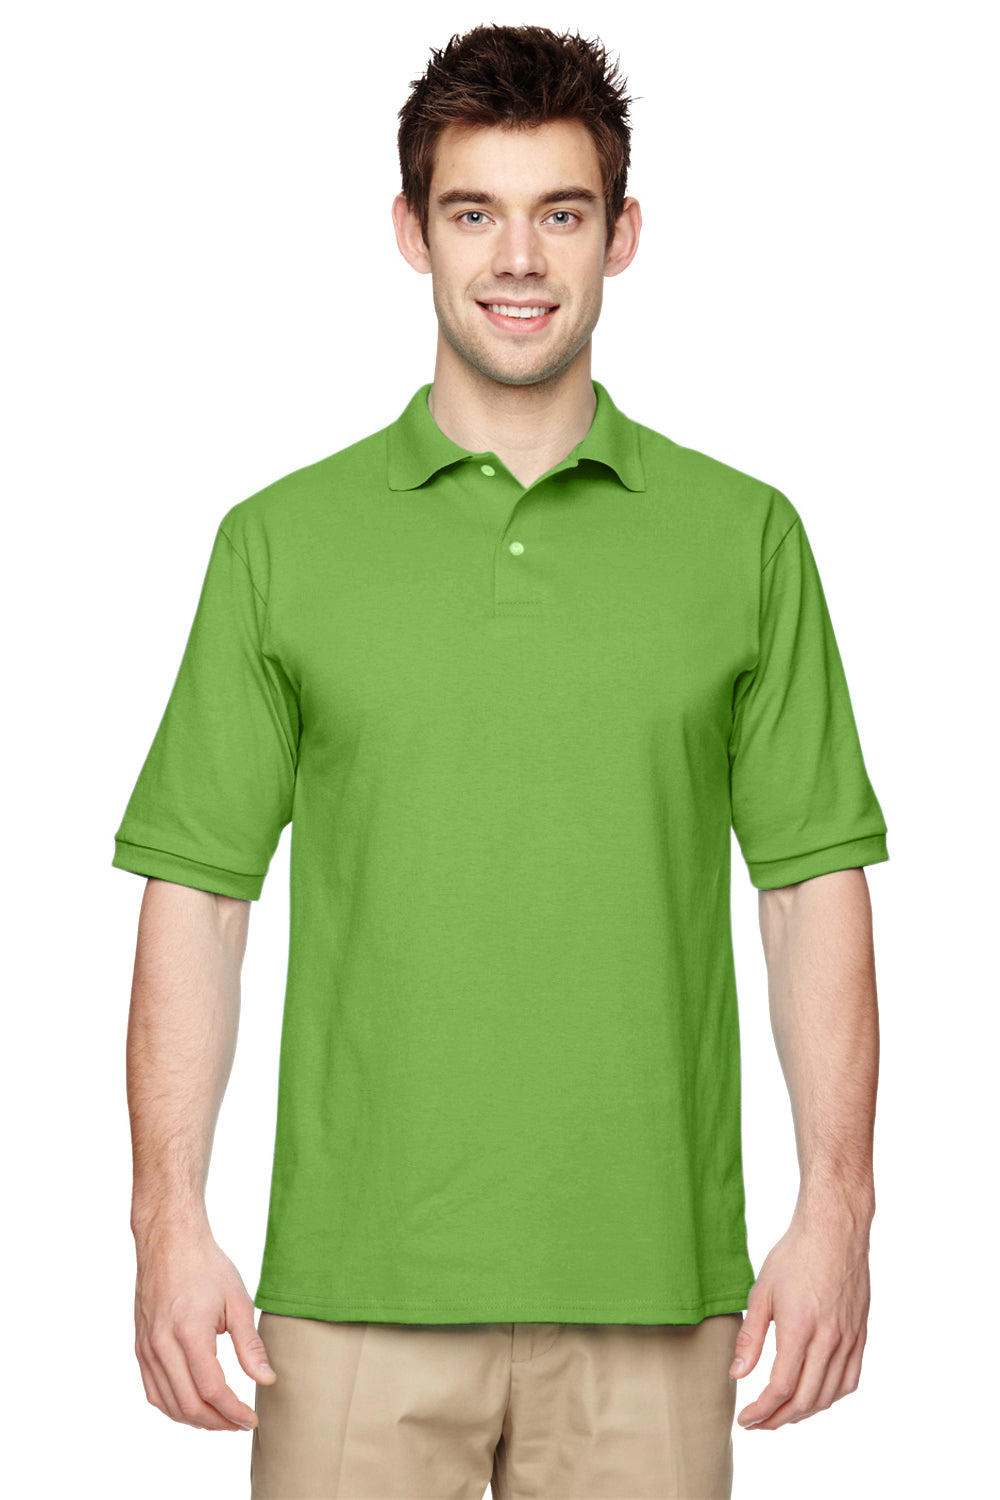 Jerzees 437 Mens SpotShield Stain Resistant Short Sleeve Polo Shirt Kiwi Green Front